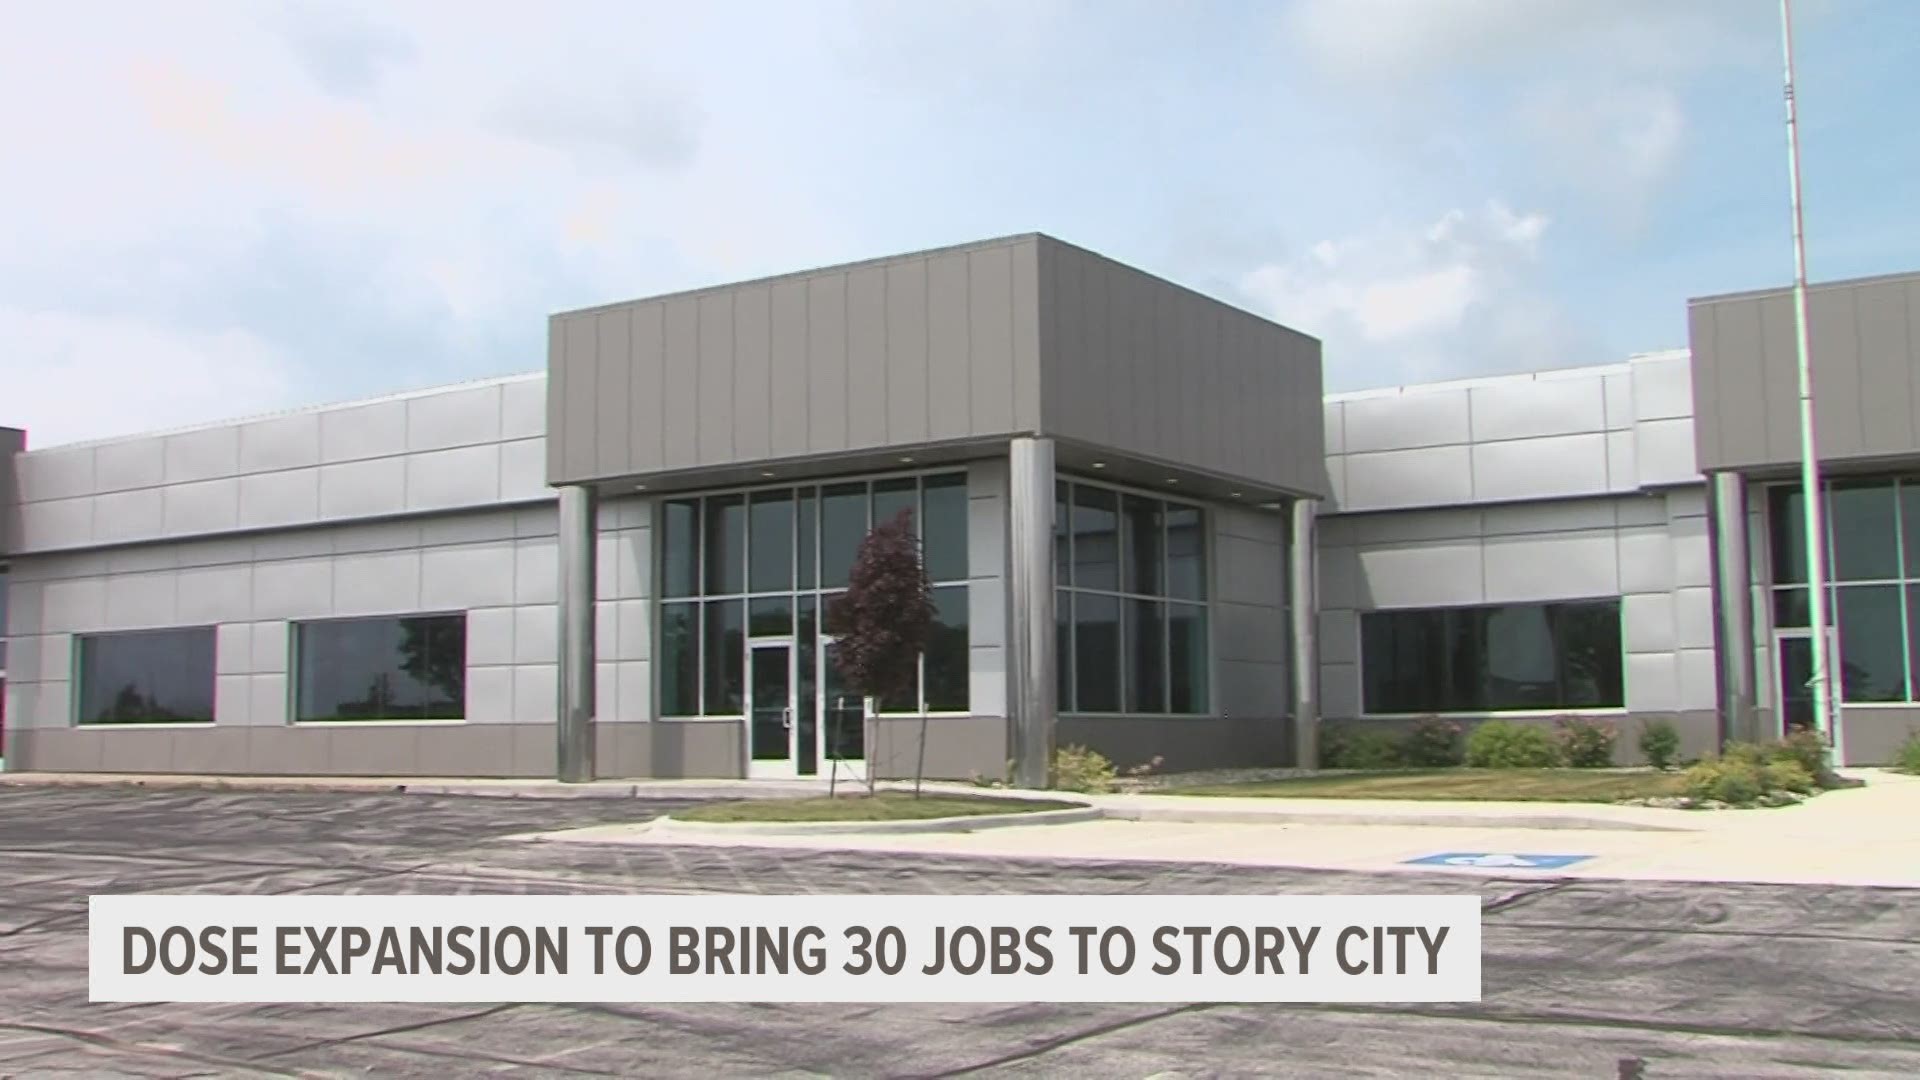 The project will bring 30 new jobs and millions of dollars in investment to Story City.